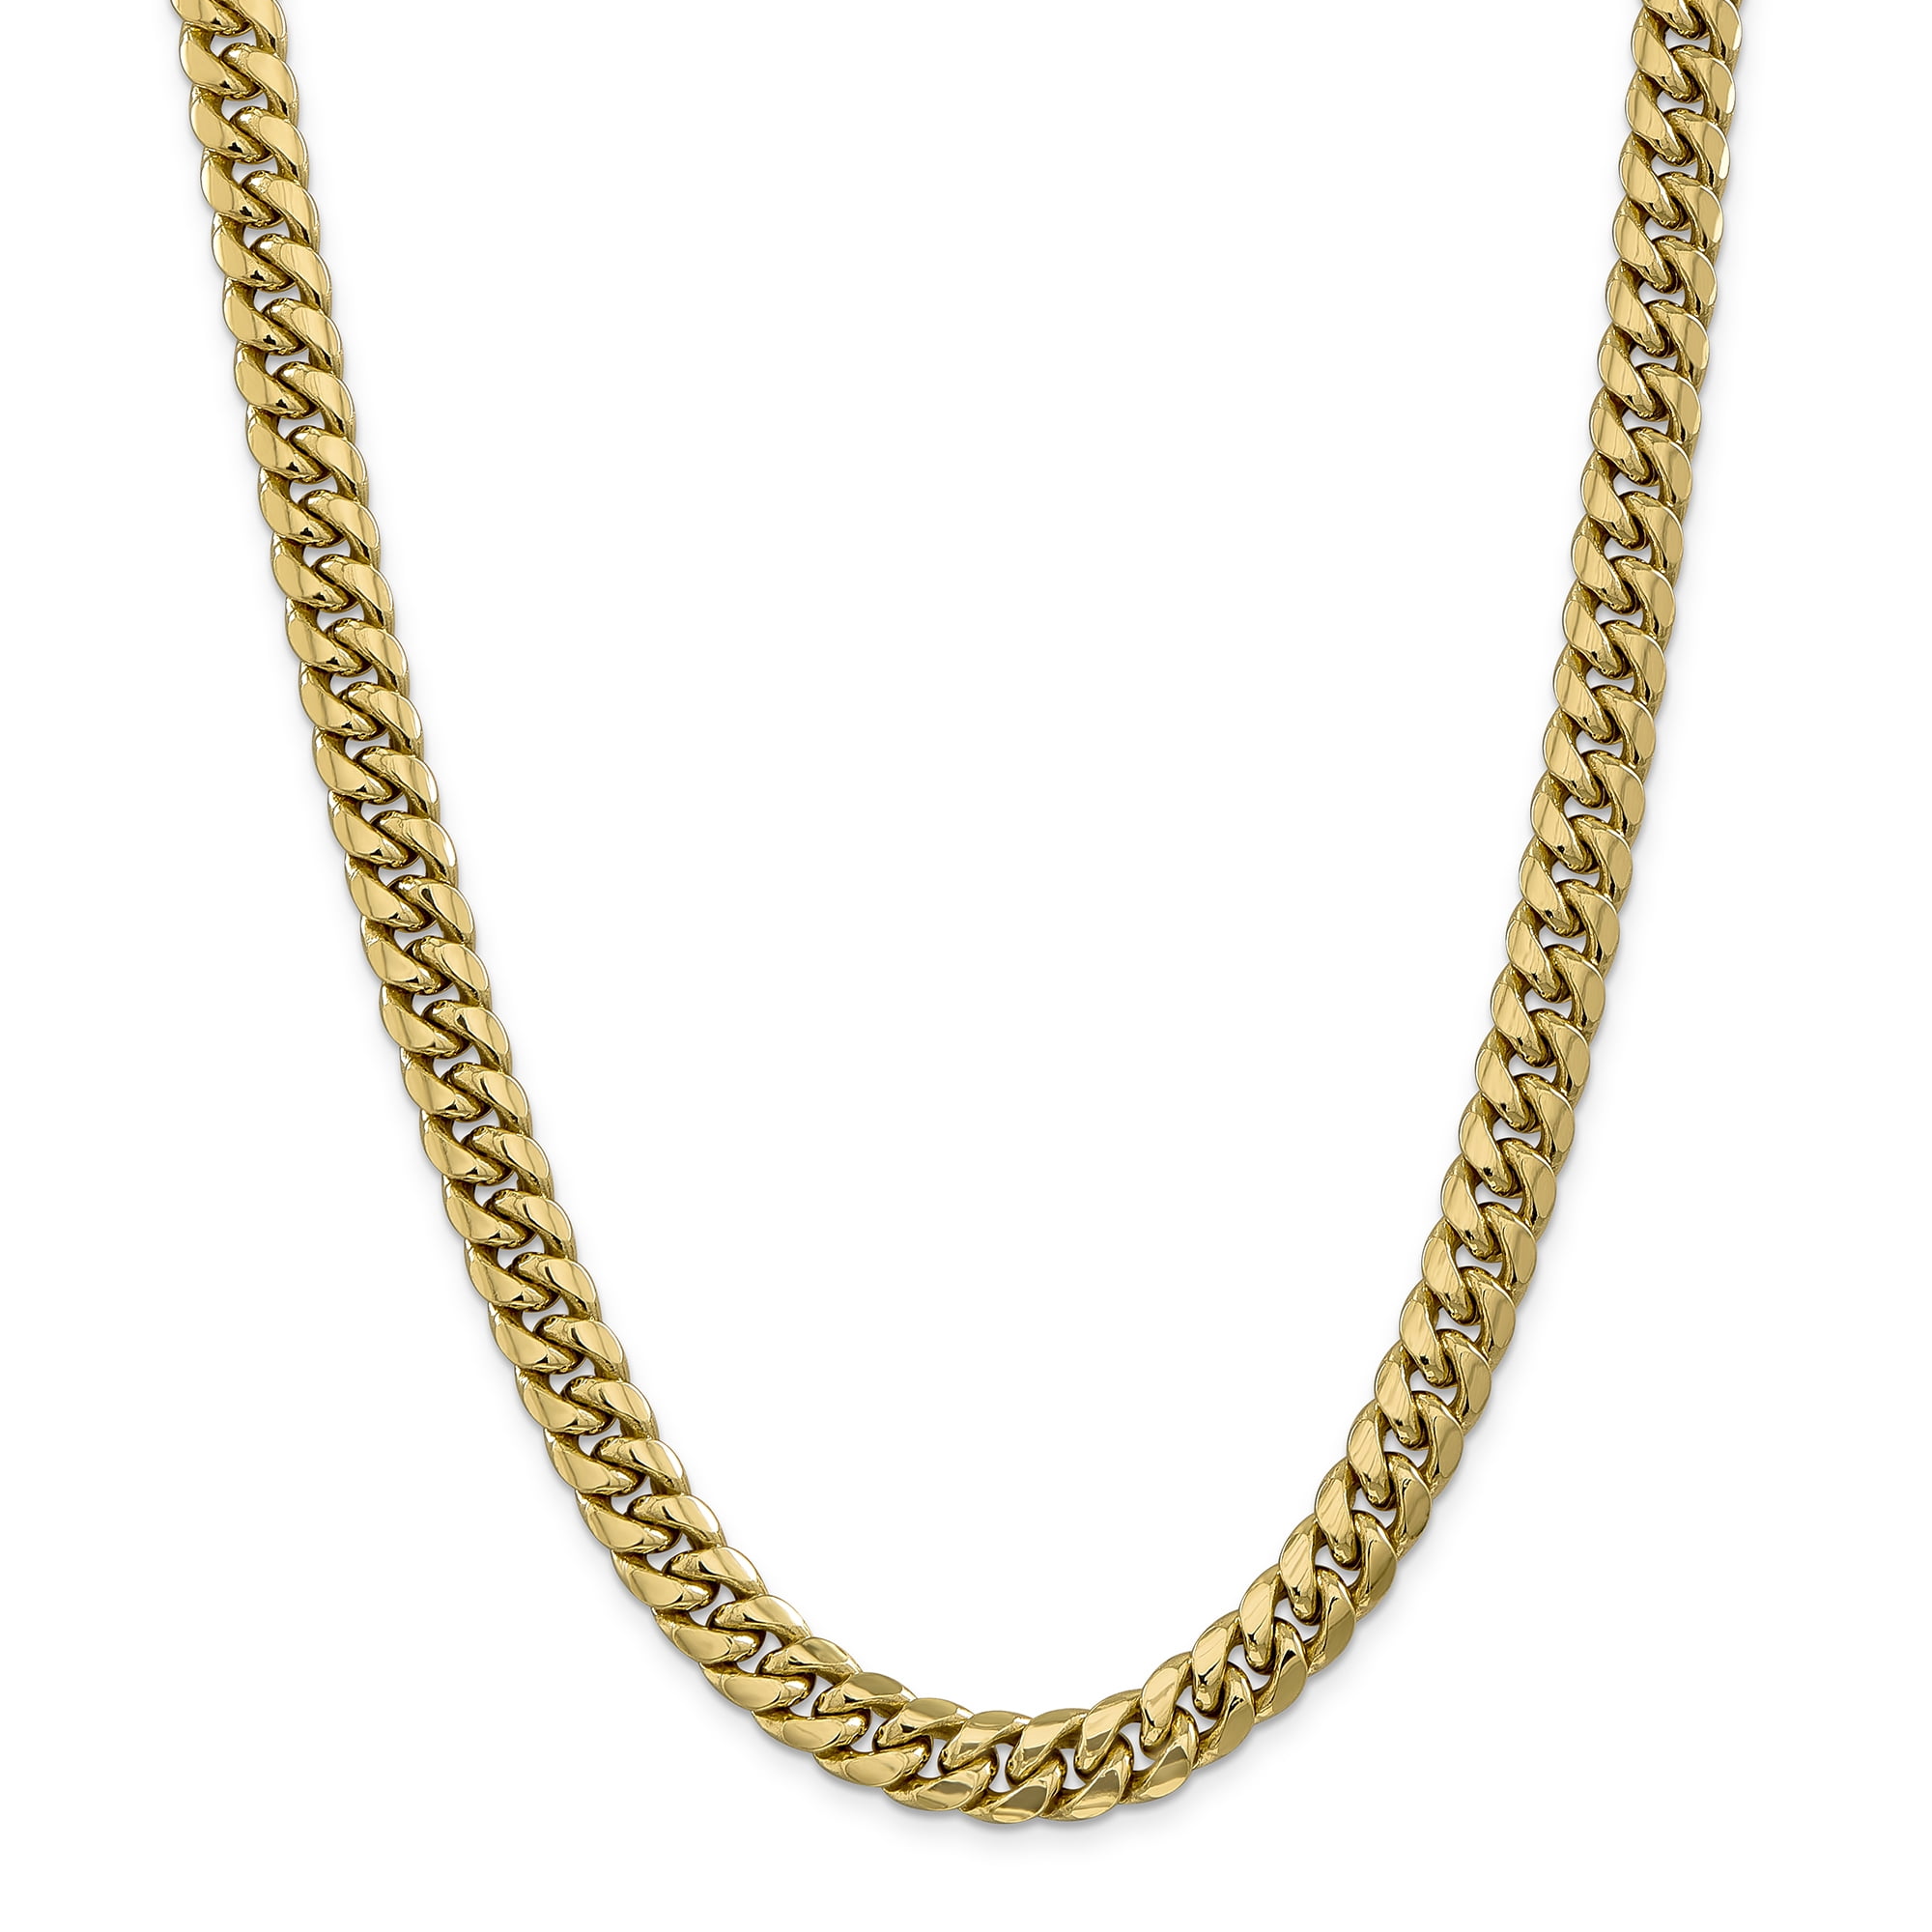 304L Yellow Gold GF Stainless Steel 9mm Miami Cuban Link Chain 24